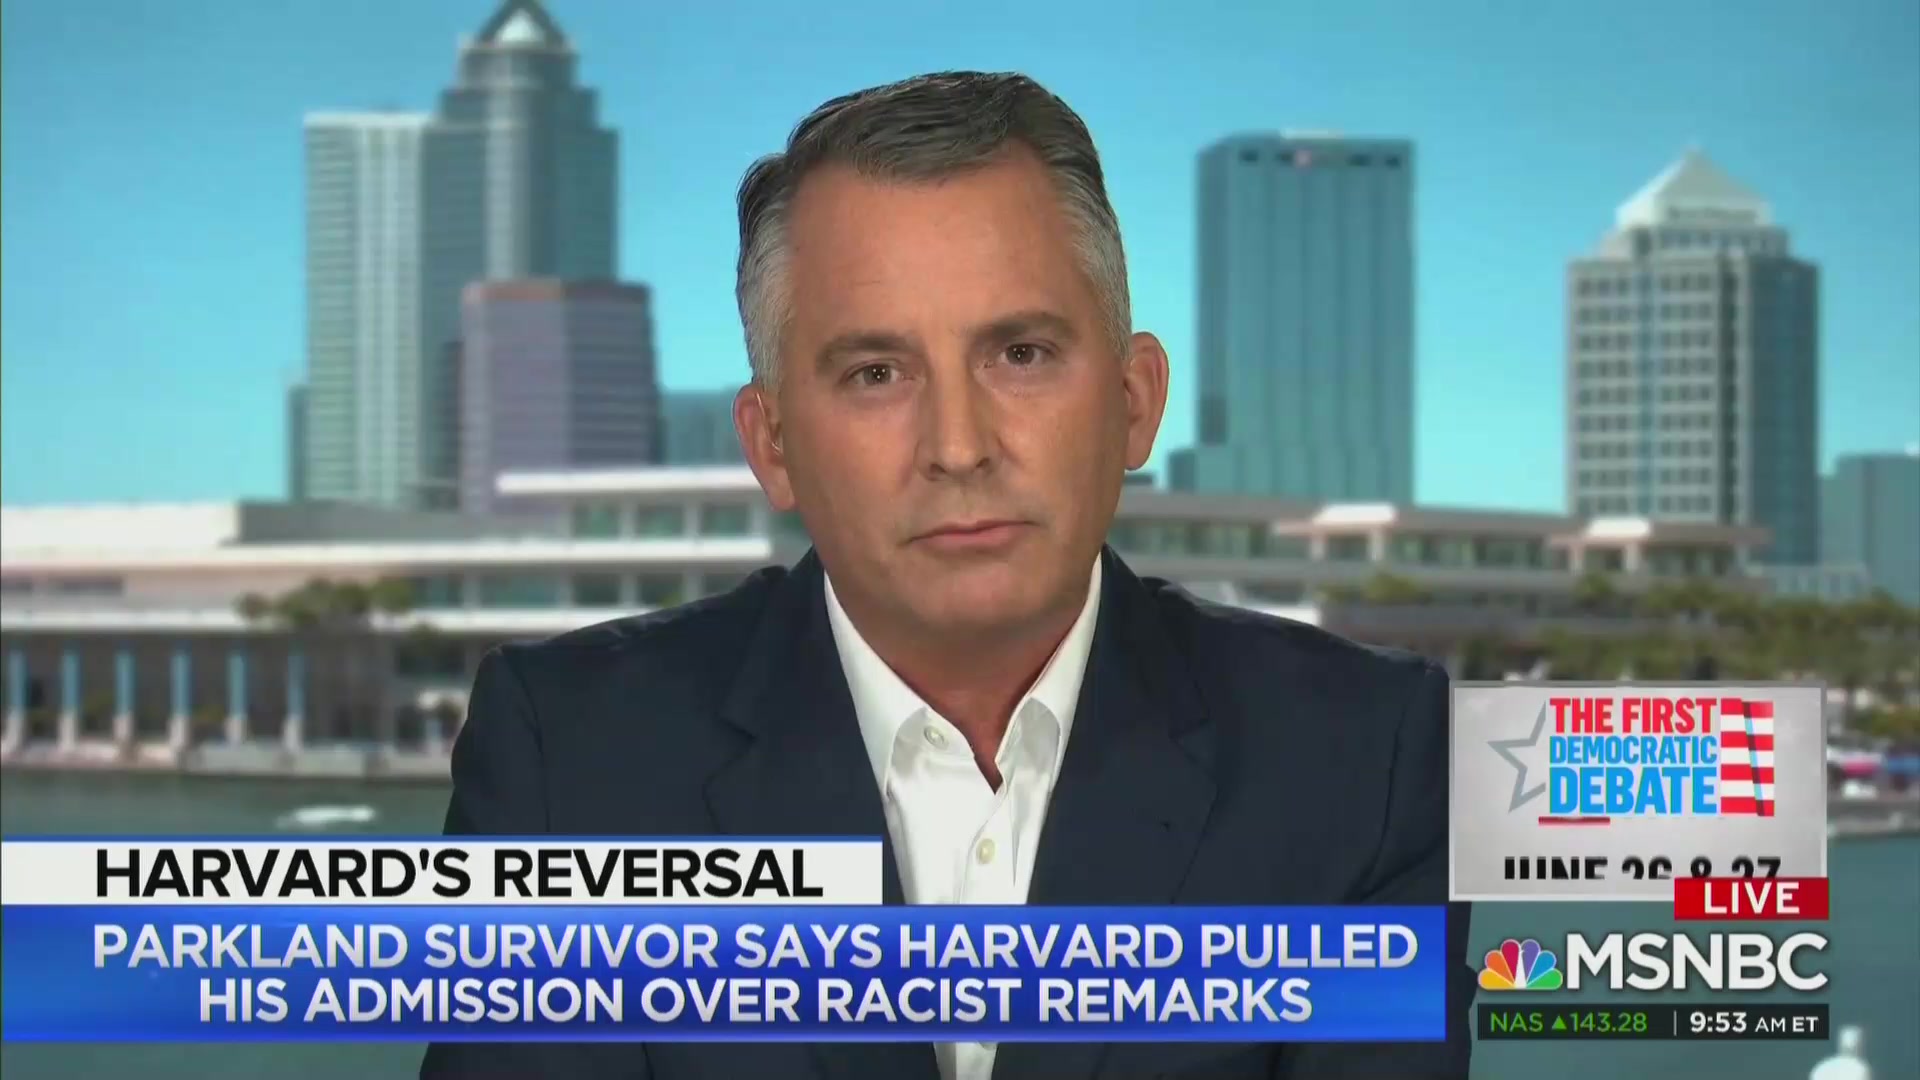 Ex-GOP Rep: I ‘See a Shooter’ When I Look at Kyle Kashuv’s Past Racist Posts